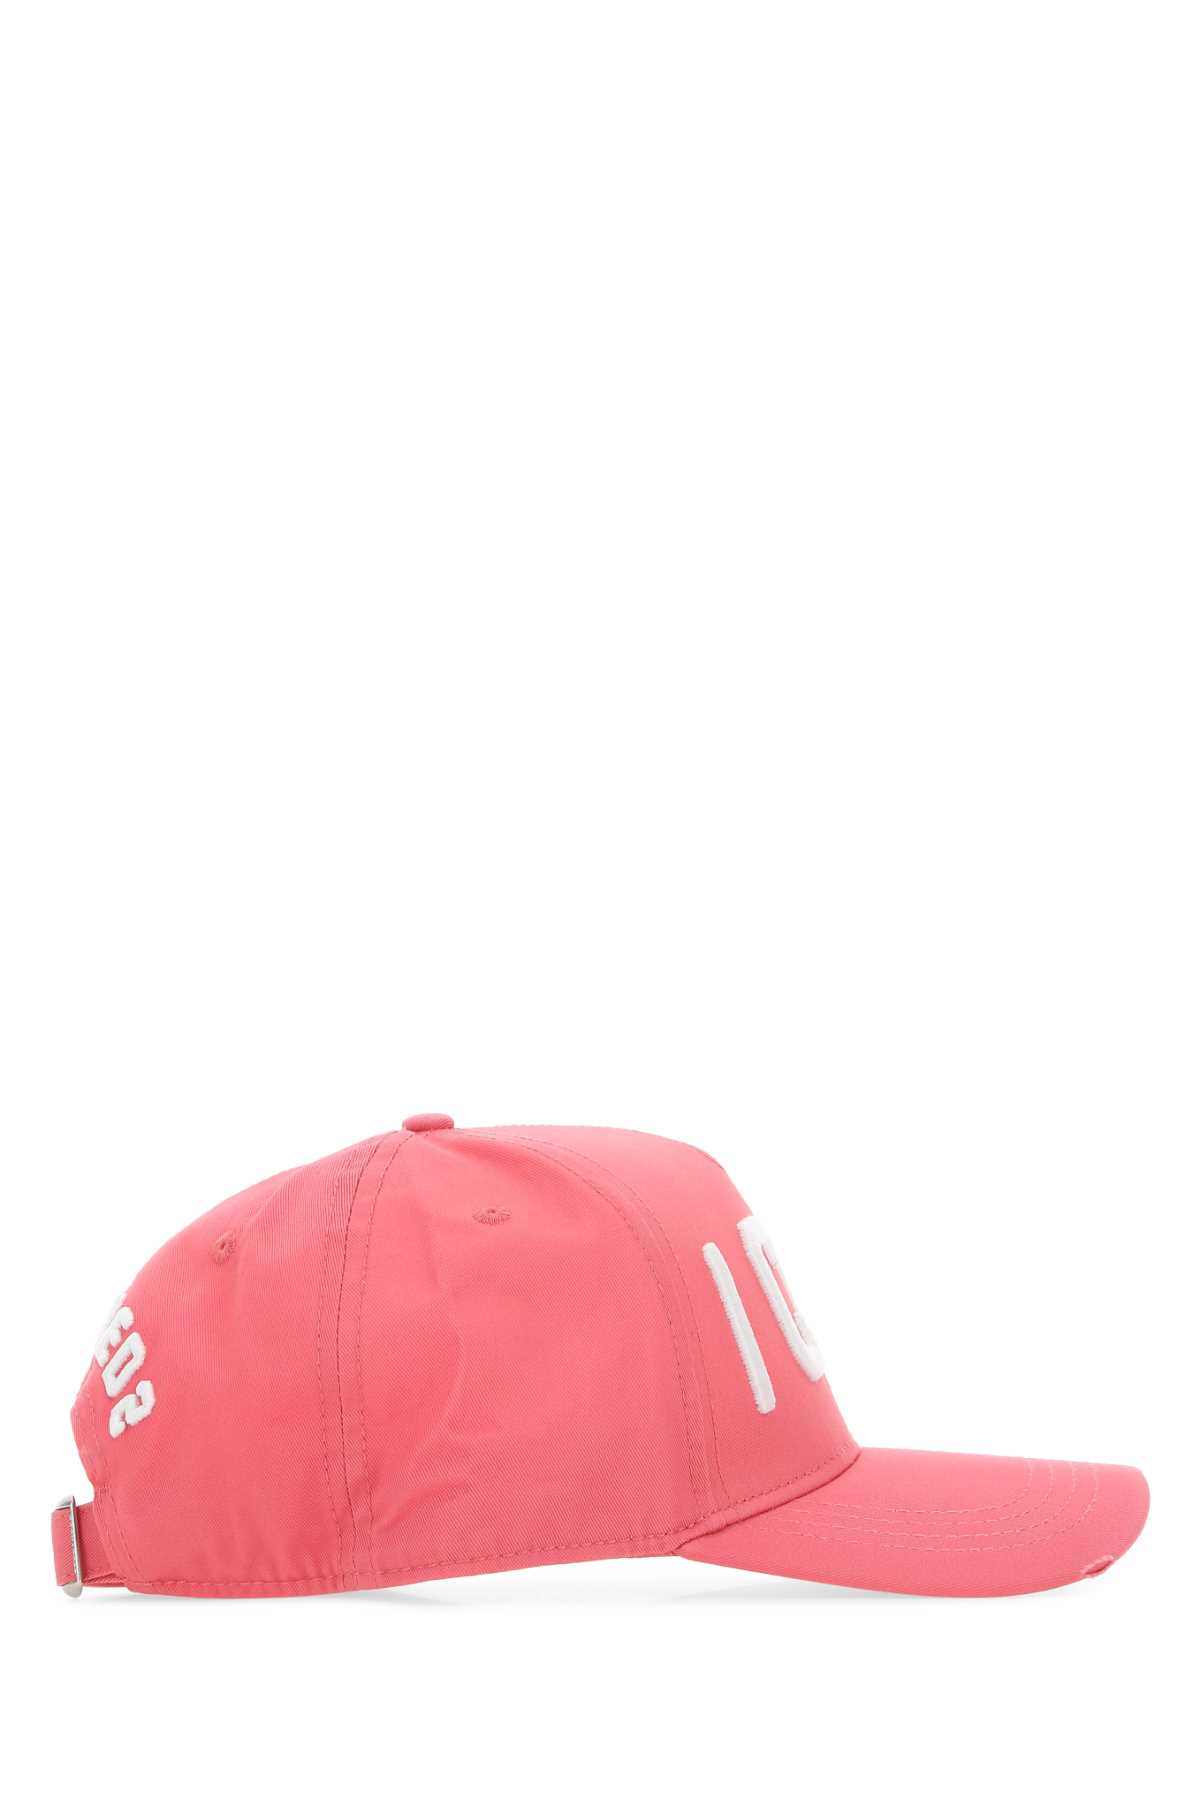 Dsquared2 Pink Cotton Baseball Cap In M1972